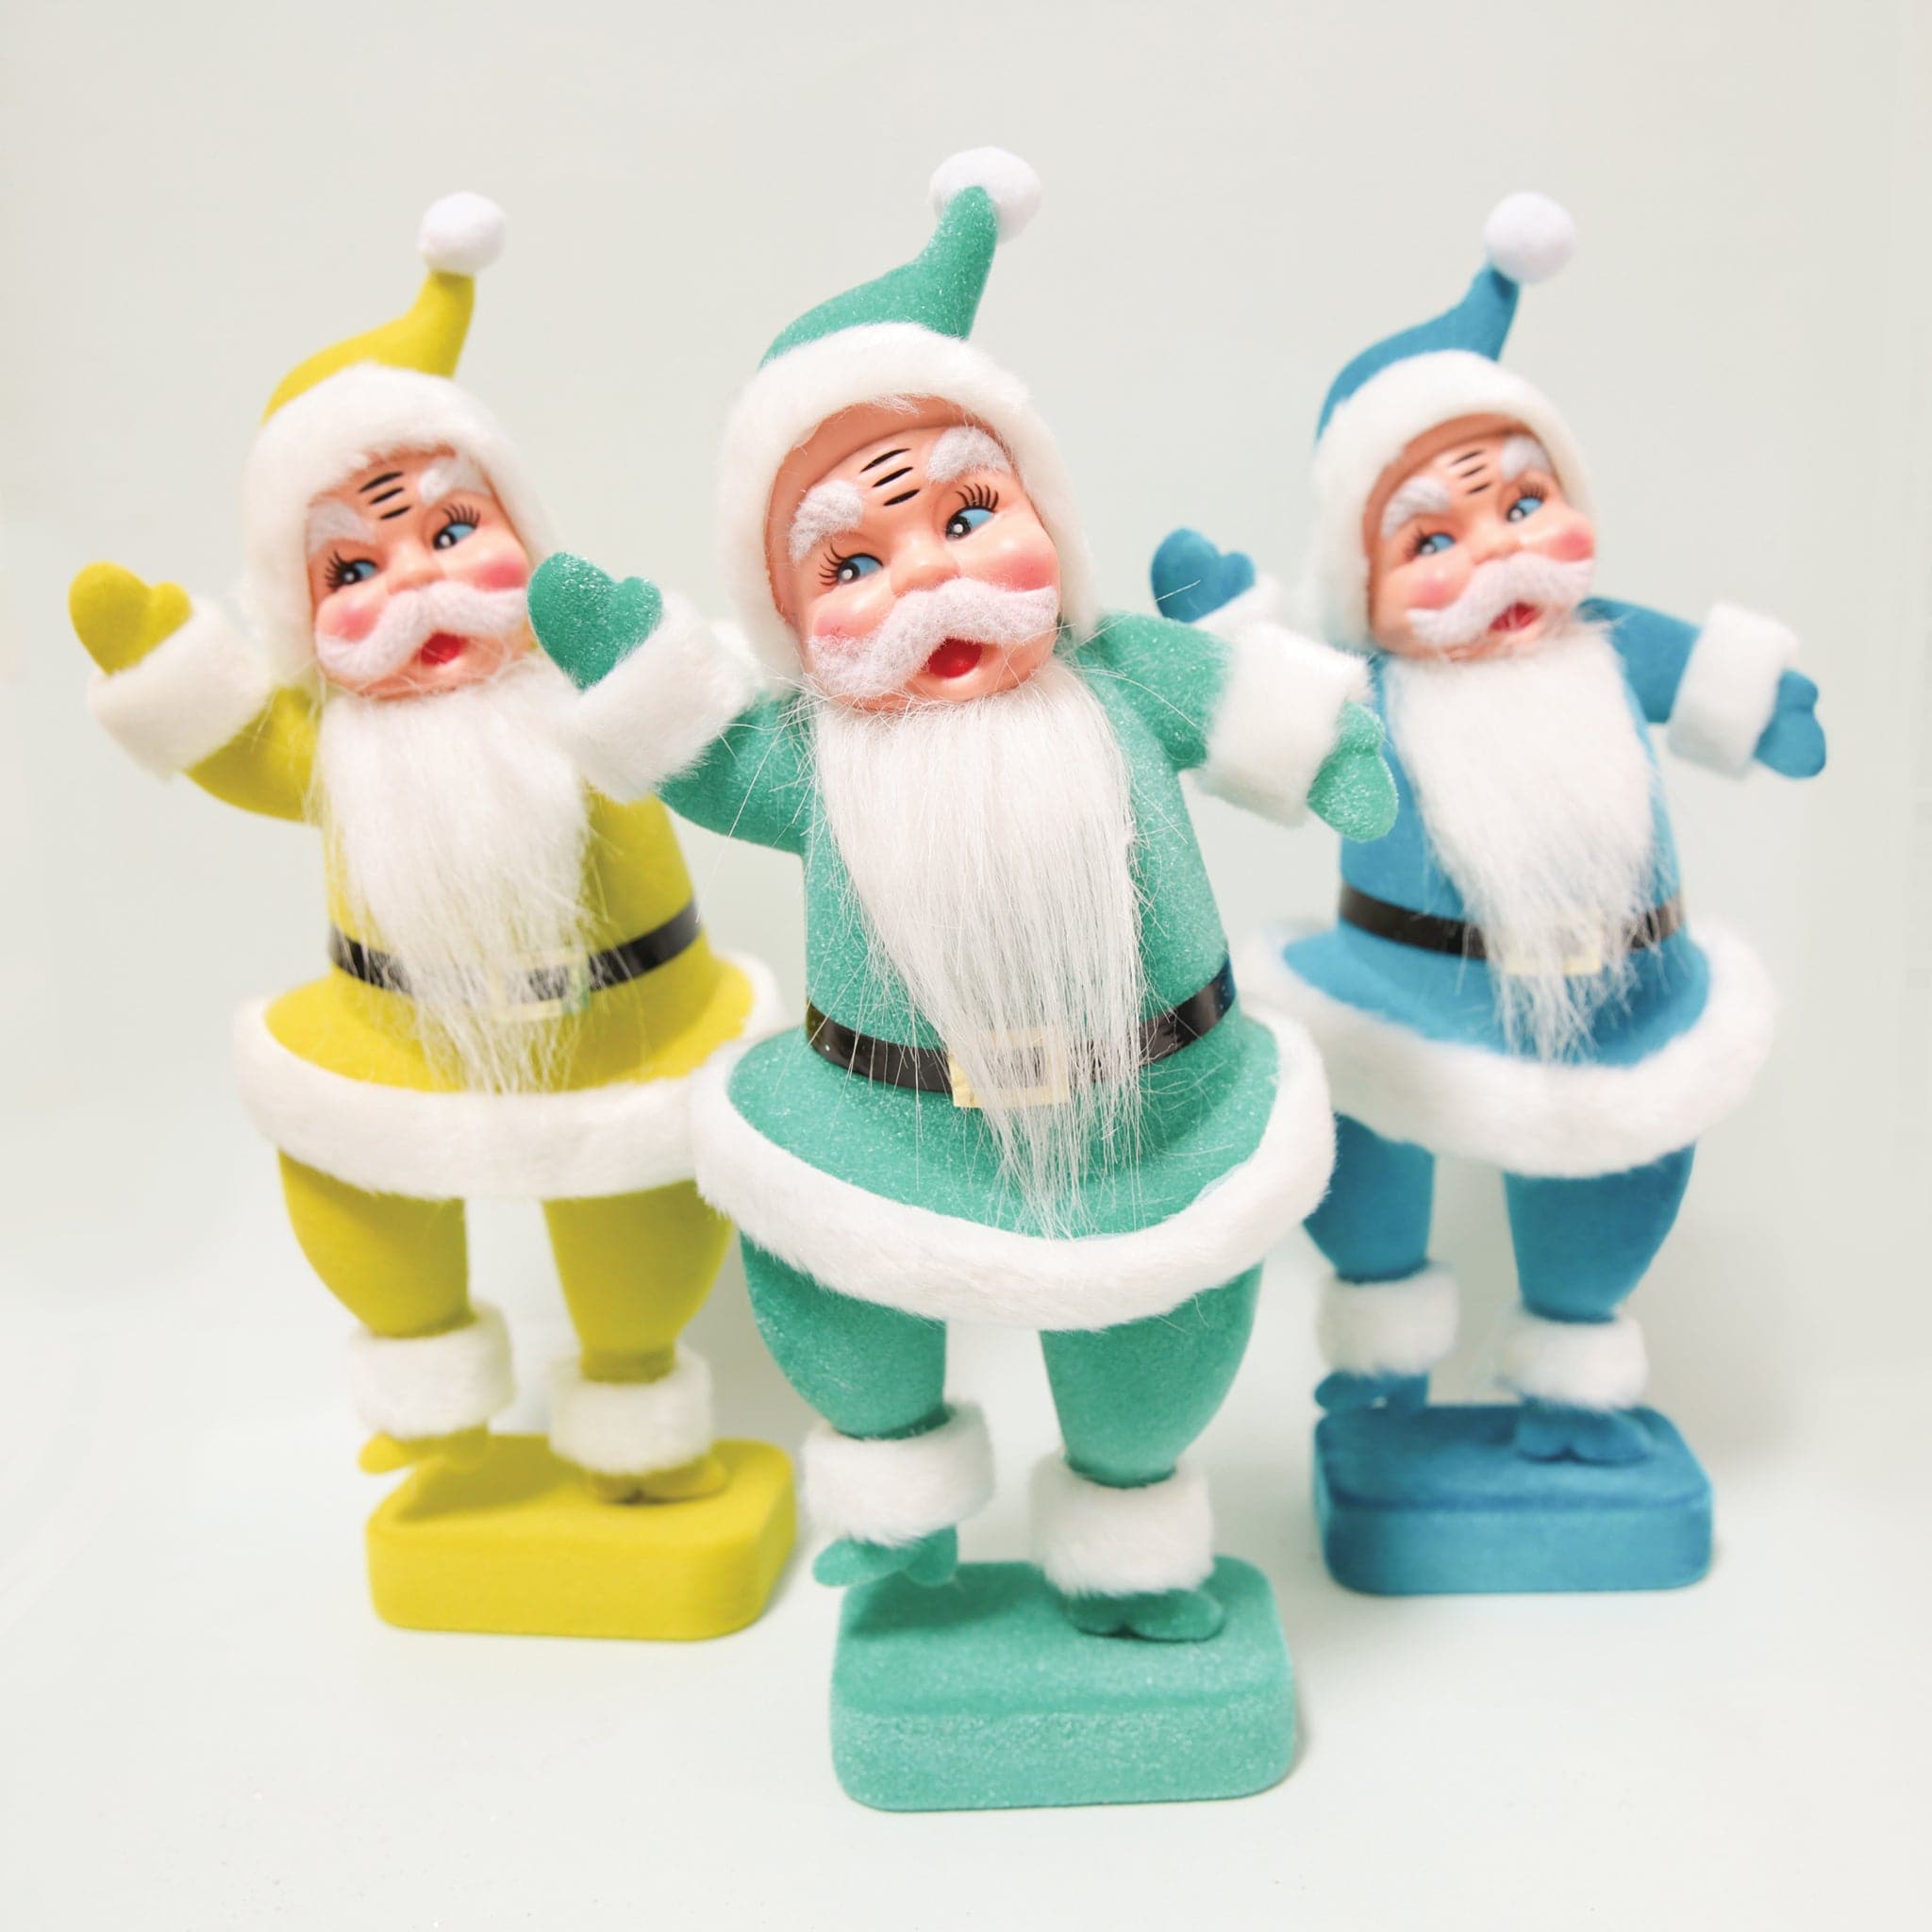 A plastic Santa figurine with a teal suit on with fuzzy cuffs and hat next to all the other colors available.